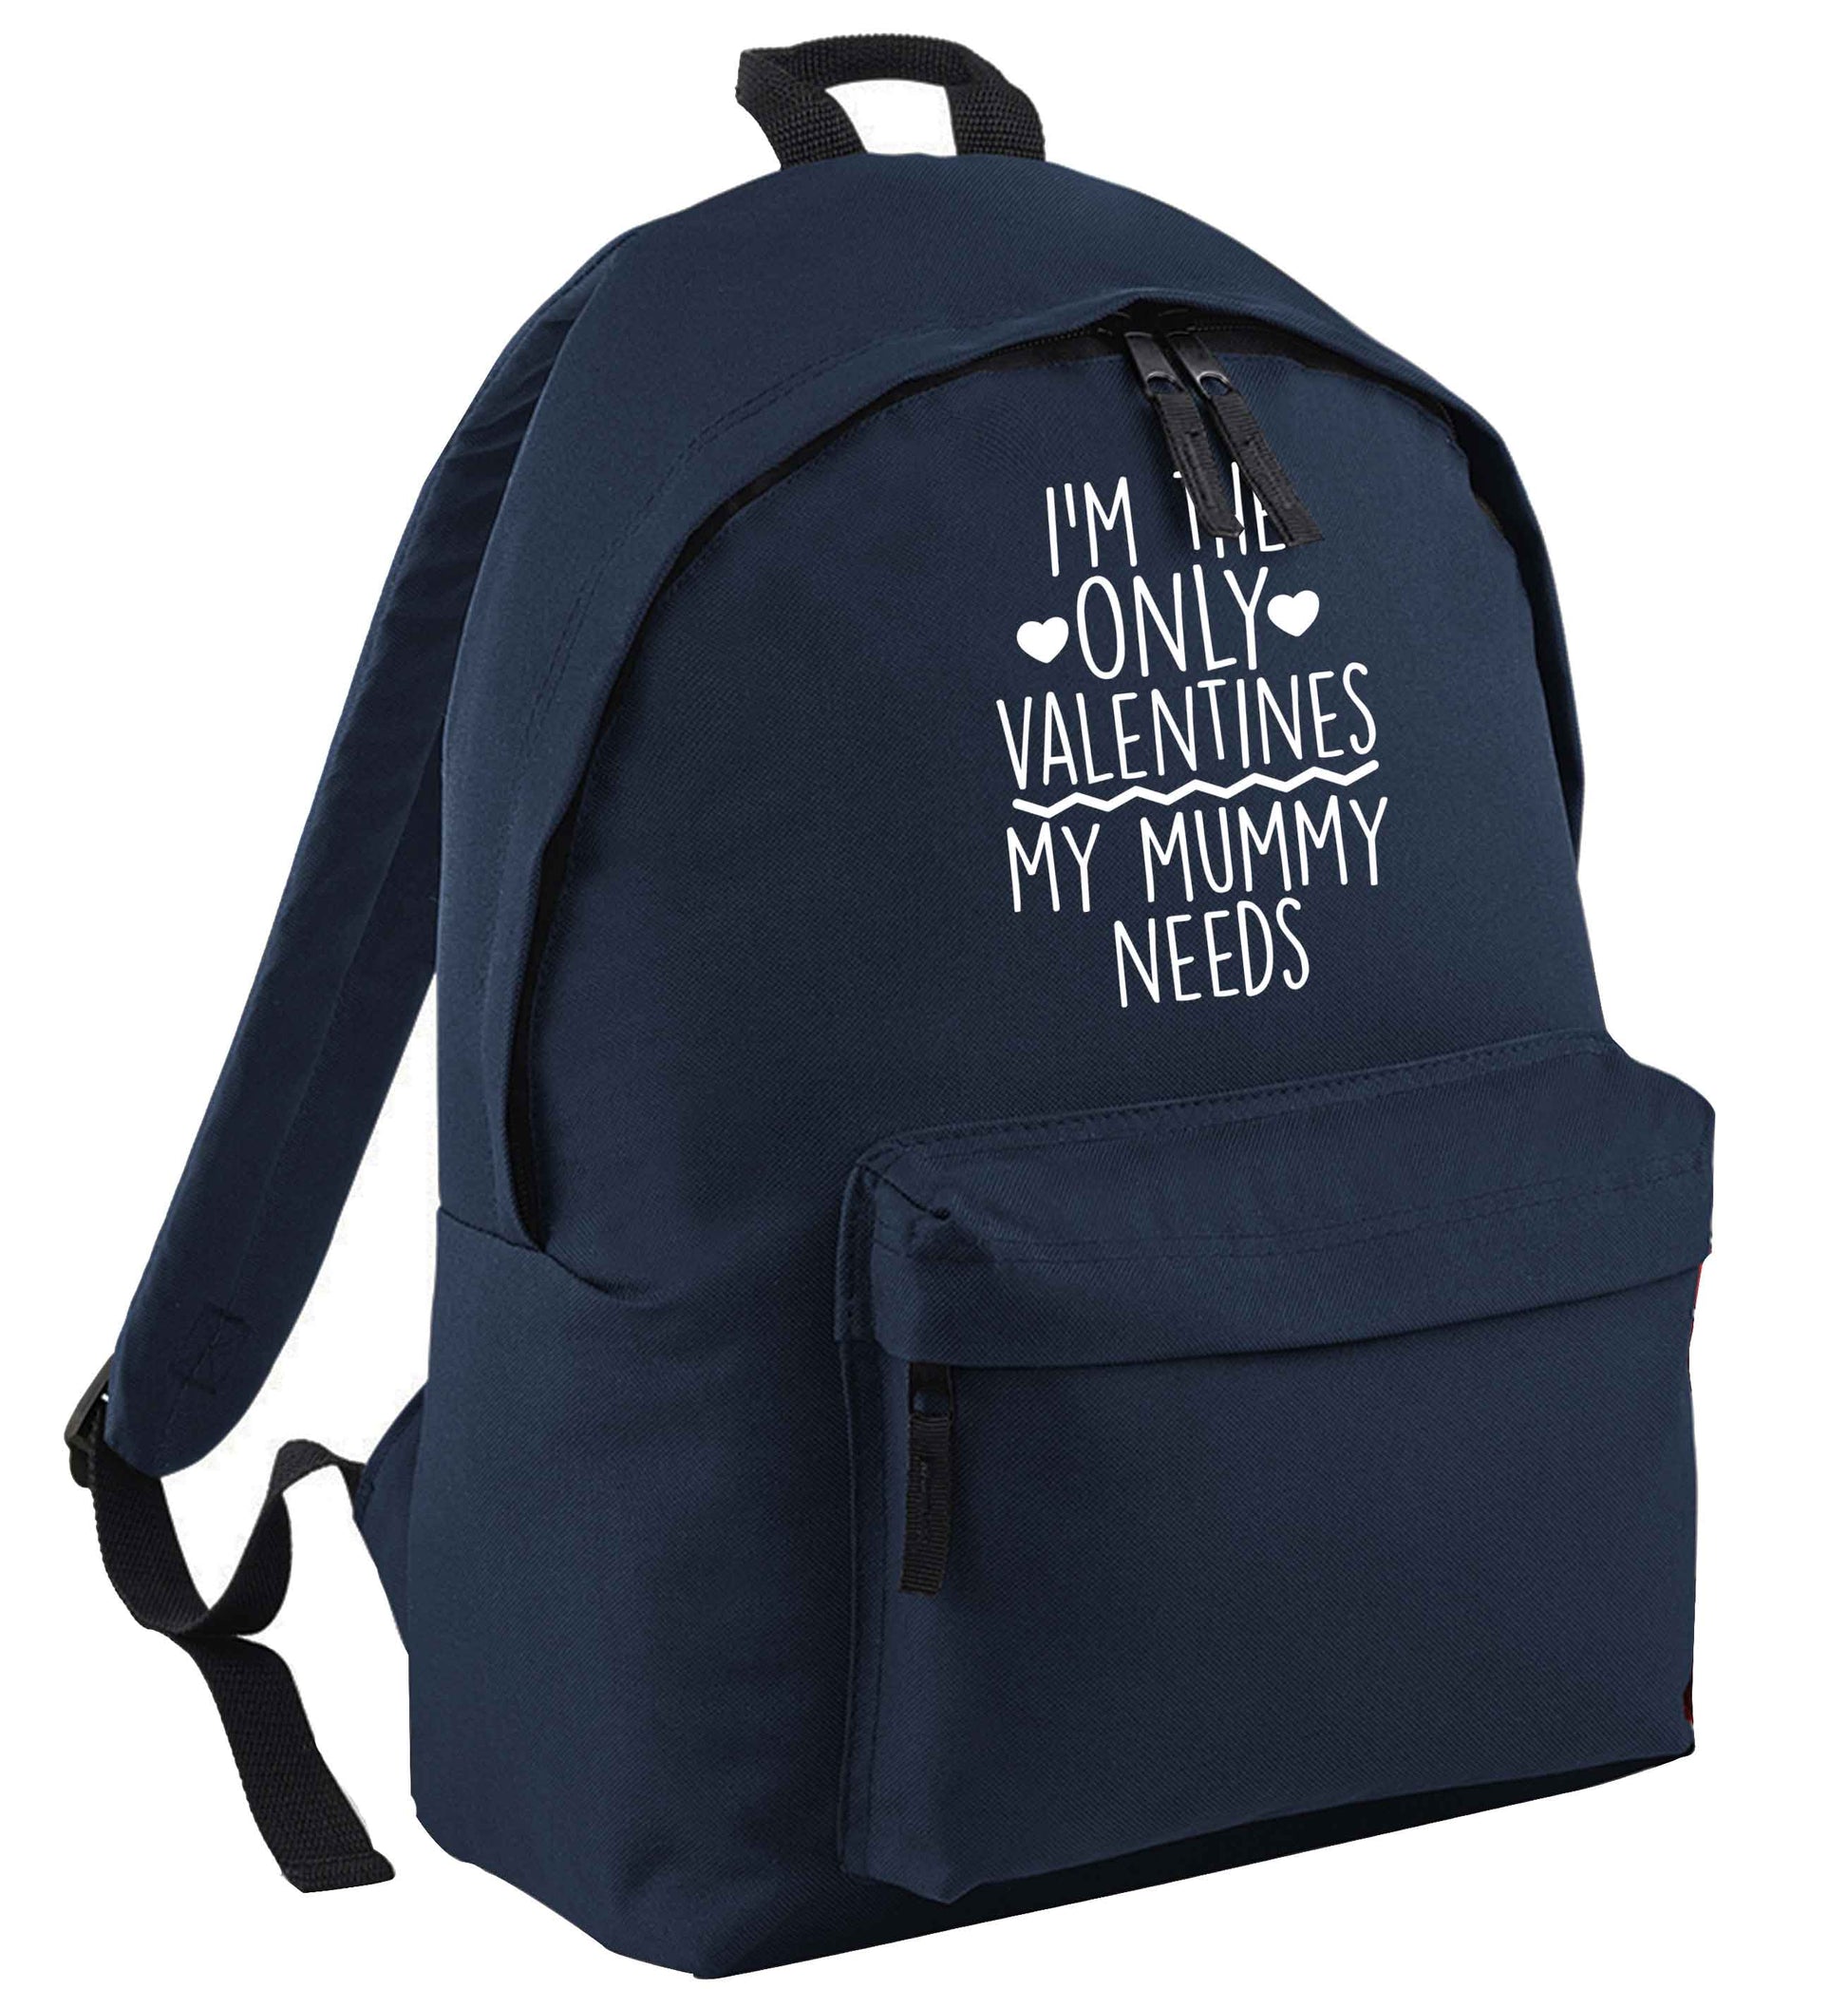 I'm the only valentines my mummy needs navy adults backpack